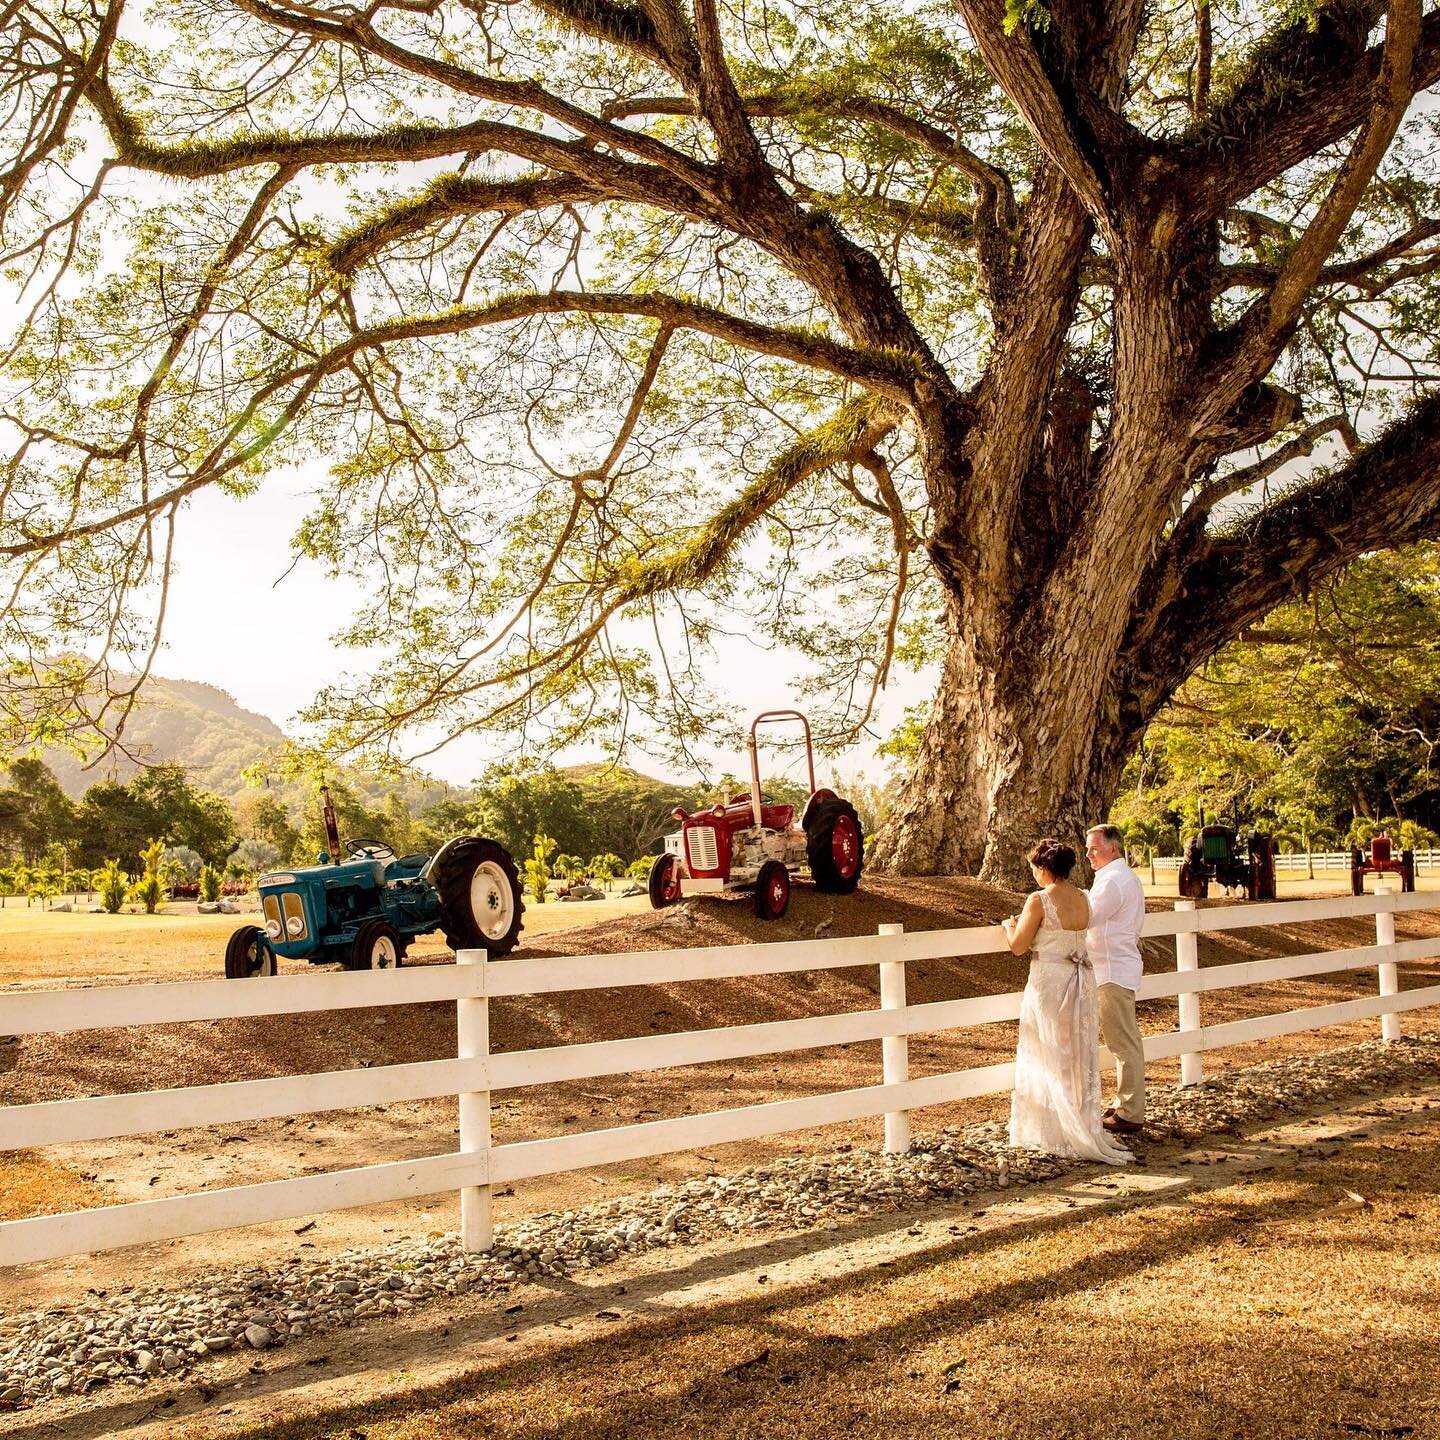 This photo is from the first wedding I ever photographed. It a iconic property in Mowbray Valley and now this beautiful property is available for weddings 😍 check it out. @portdouglaslakesideretreat